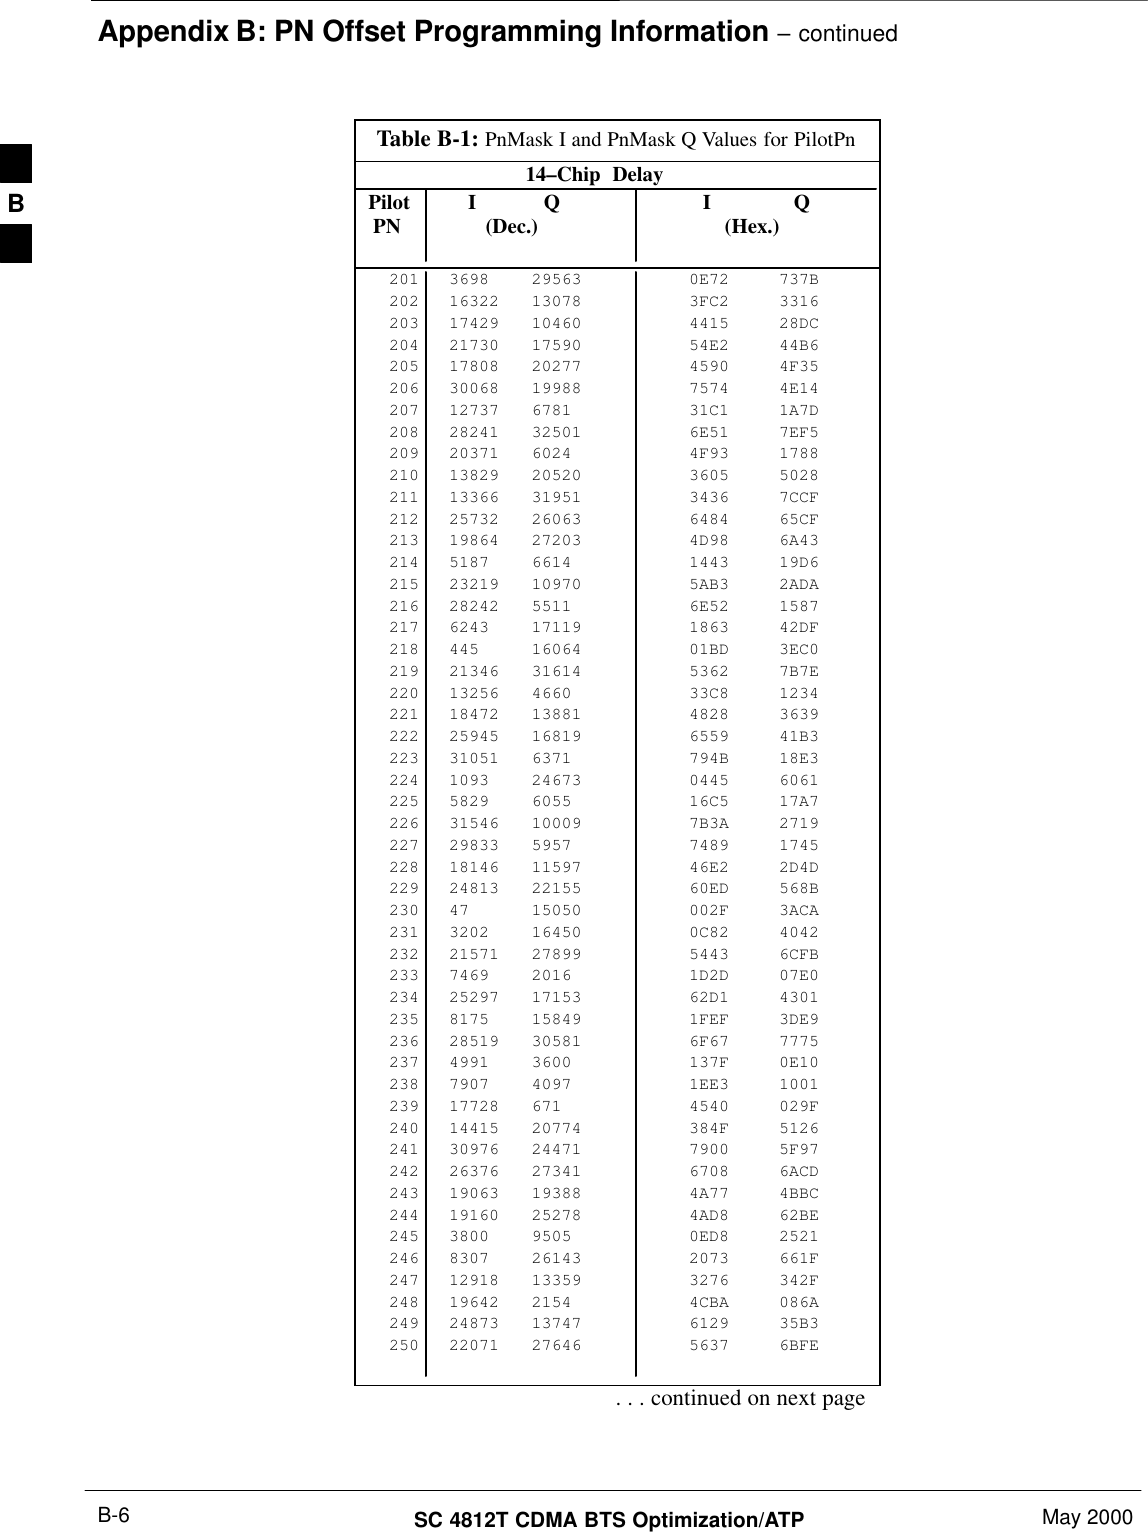 Appendix B: PN Offset Programming Information – continuedSC 4812T CDMA BTS Optimization/ATP May 2000B-6Table B-1: PnMask I and PnMask Q Values for PilotPn14–Chip  Delay Pilot I Q I Q  PN (Dec.)          (Hex.)201 3698 29563 0E72 737B202 16322 13078 3FC2 3316203 17429 10460 4415 28DC204 21730 17590 54E2 44B6205 17808 20277 4590 4F35206 30068 19988 7574 4E14207 12737 6781 31C1 1A7D208 28241 32501 6E51 7EF5209 20371 6024 4F93 1788210 13829 20520 3605 5028211 13366 31951 3436 7CCF212 25732 26063 6484 65CF213 19864 27203 4D98 6A43214 5187 6614 1443 19D6215 23219 10970 5AB3 2ADA216 28242 5511 6E52 1587217 6243 17119 1863 42DF218 445 16064 01BD 3EC0219 21346 31614 5362 7B7E220 13256 4660 33C8 1234221 18472 13881 4828 3639222 25945 16819 6559 41B3223 31051 6371 794B 18E3224 1093 24673 0445 6061225 5829 6055 16C5 17A7226 31546 10009 7B3A 2719227 29833 5957 7489 1745228 18146 11597 46E2 2D4D229 24813 22155 60ED 568B230 47 15050 002F 3ACA231 3202 16450 0C82 4042232 21571 27899 5443 6CFB233 7469 2016 1D2D 07E0234 25297 17153 62D1 4301235 8175 15849 1FEF 3DE9236 28519 30581 6F67 7775237 4991 3600 137F 0E10238 7907 4097 1EE3 1001239 17728 671 4540 029F240 14415 20774 384F 5126241 30976 24471 7900 5F97242 26376 27341 6708 6ACD243 19063 19388 4A77 4BBC244 19160 25278 4AD8 62BE245 3800 9505 0ED8 2521246 8307 26143 2073 661F247 12918 13359 3276 342F248 19642 2154 4CBA 086A249 24873 13747 6129 35B3250 22071 27646 5637 6BFE. . . continued on next pageB